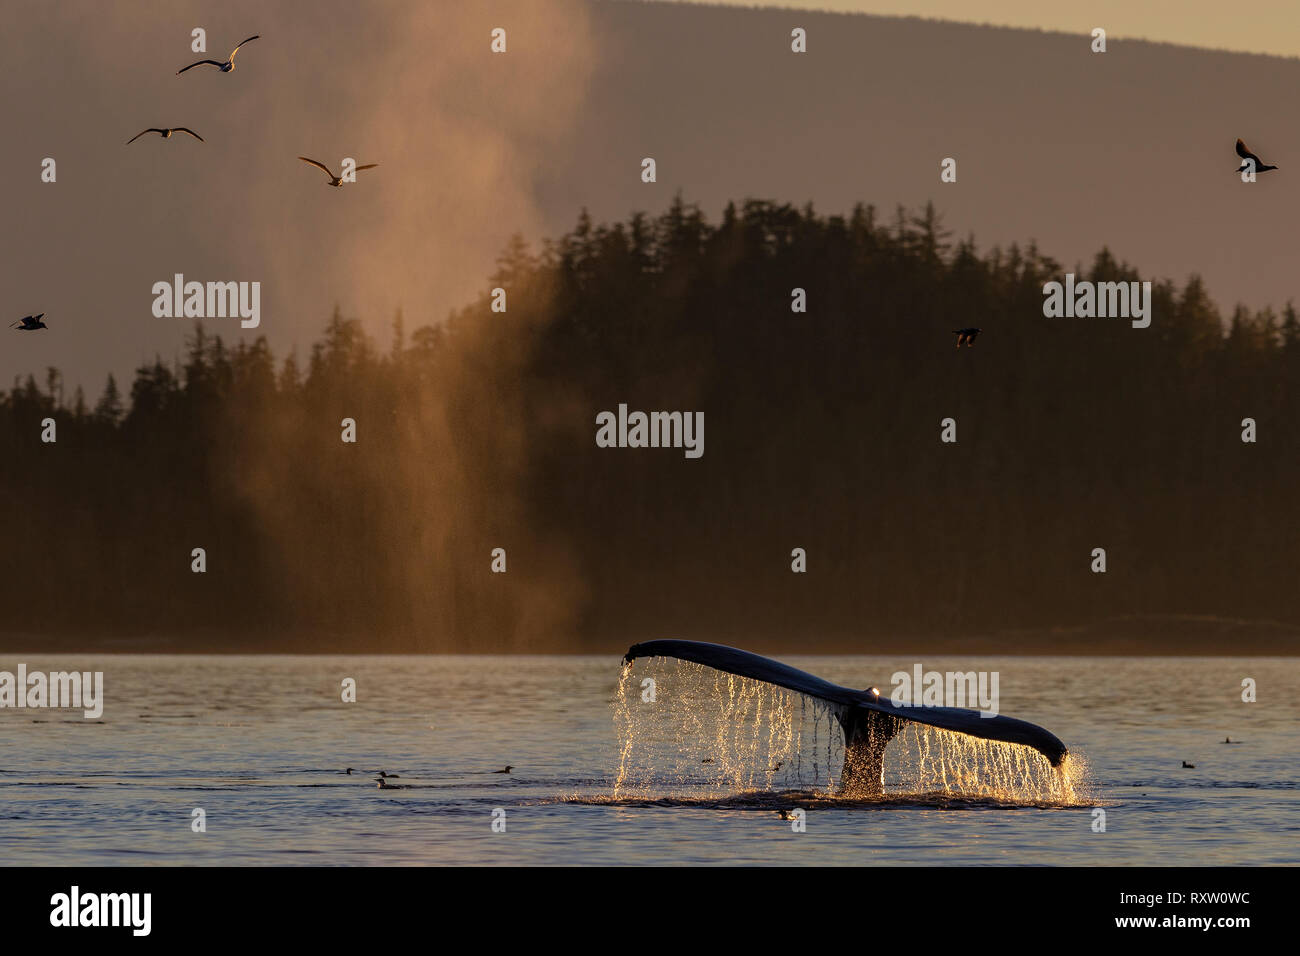 Feeding time. Humpback whales with seagulls during a peaceful sunset in Blackfish Sound, First Nations Territory, off Vancouver Island, British Columbia, Canada. Stock Photo